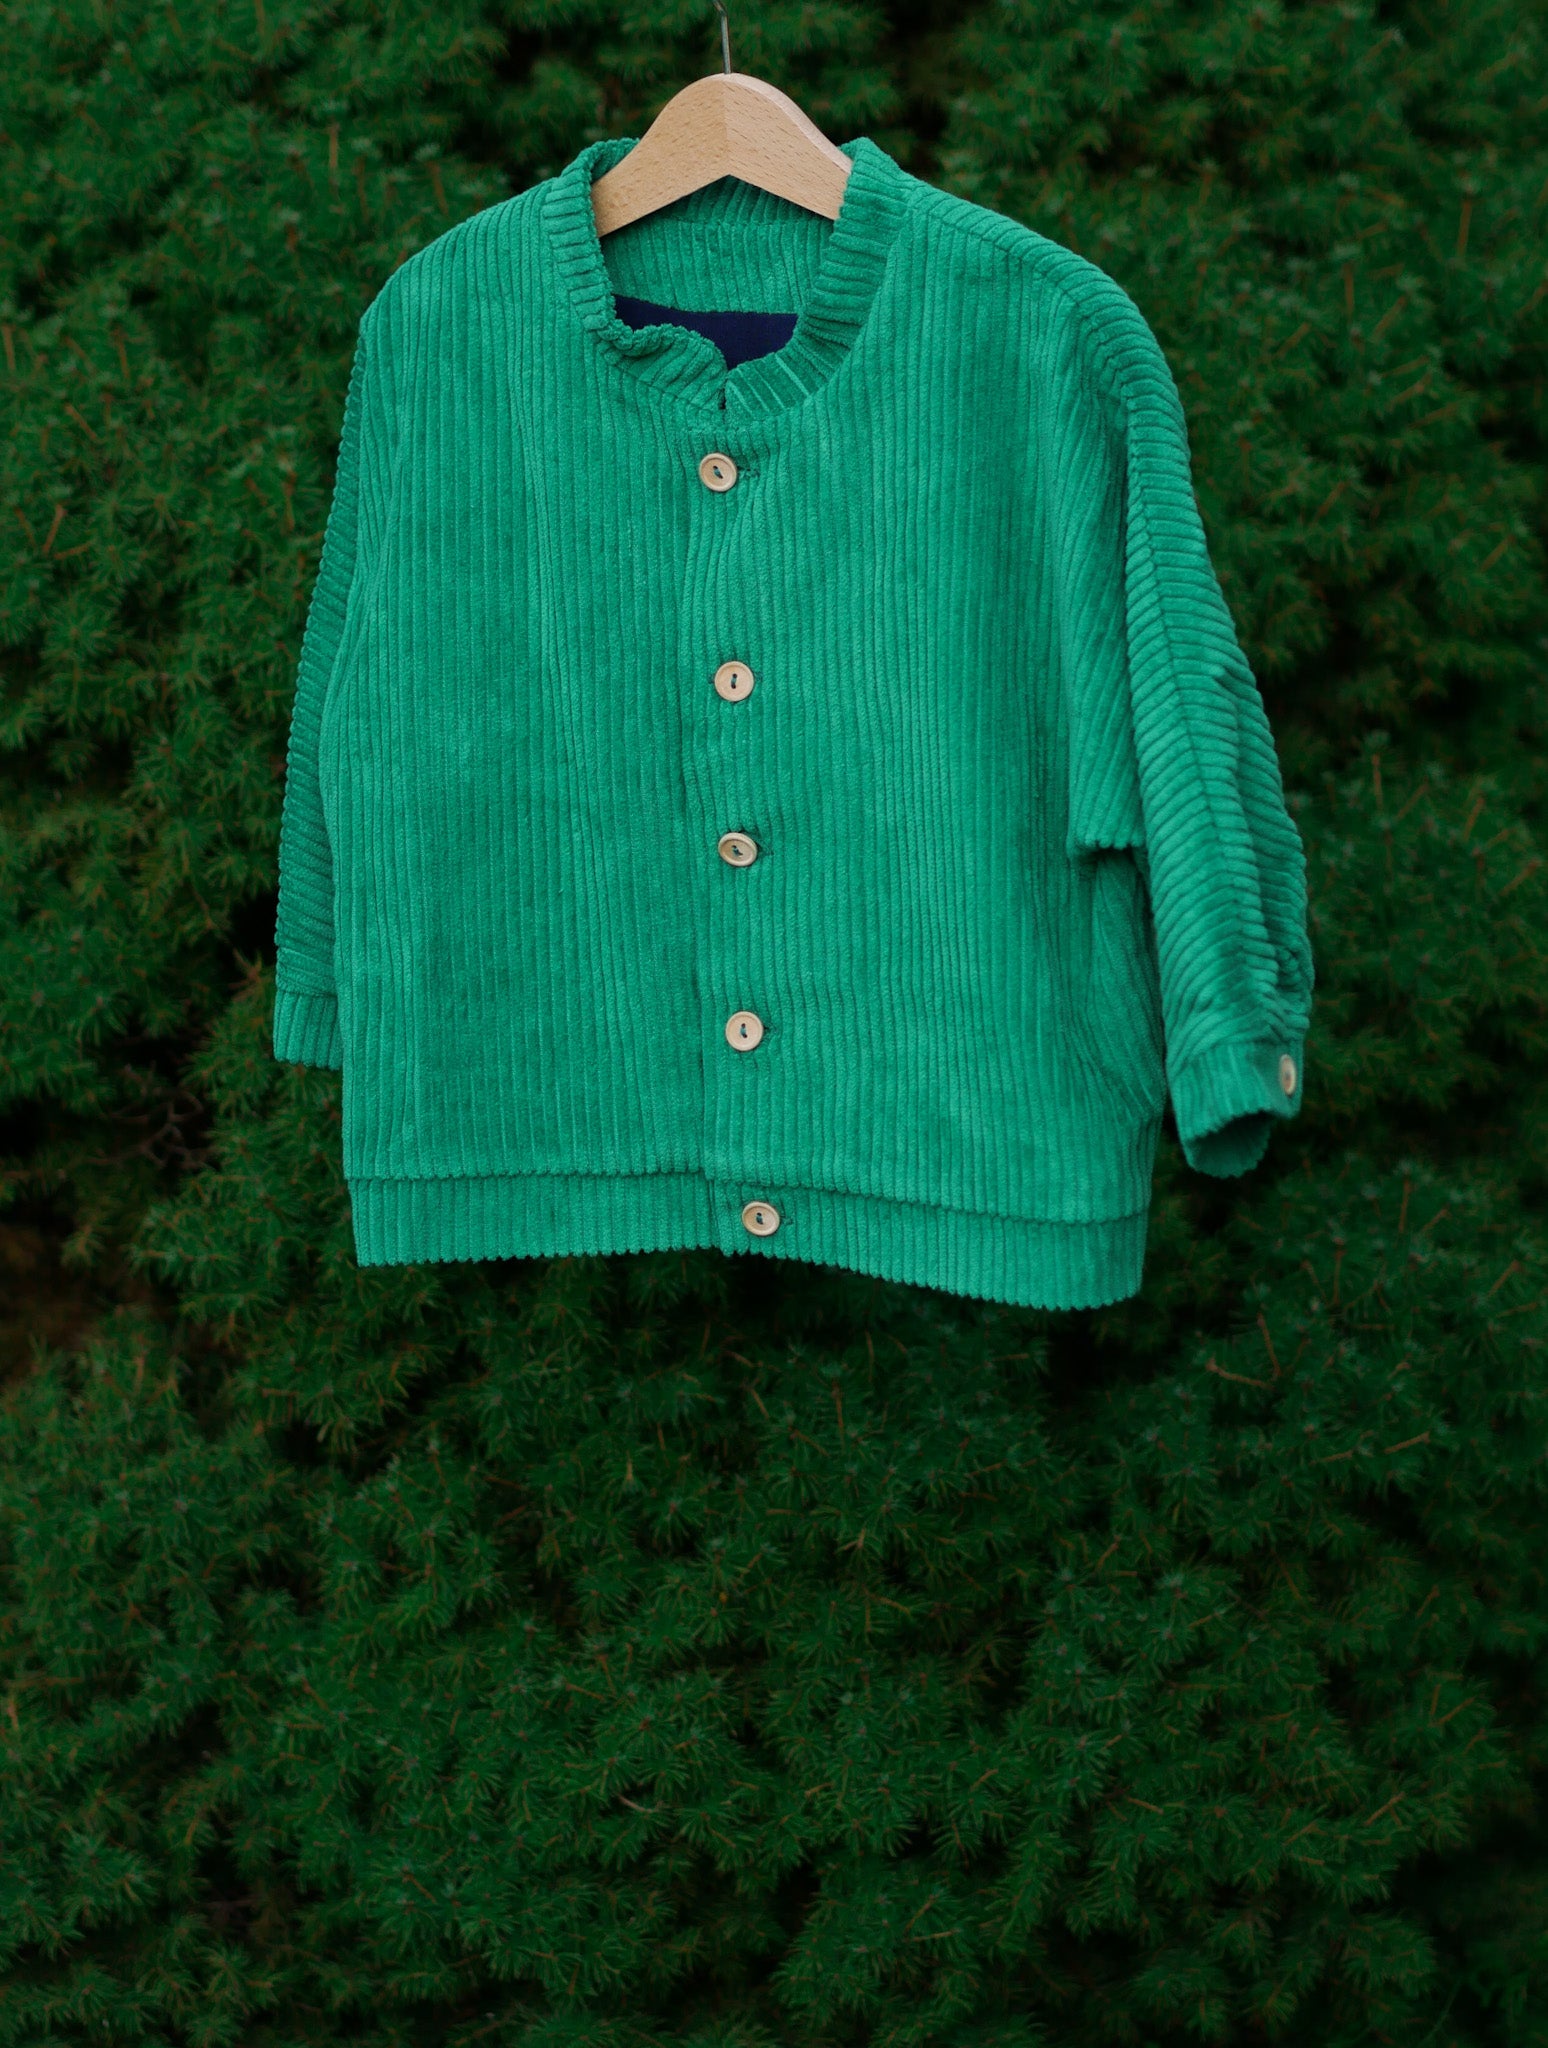 green jacket from corduroy